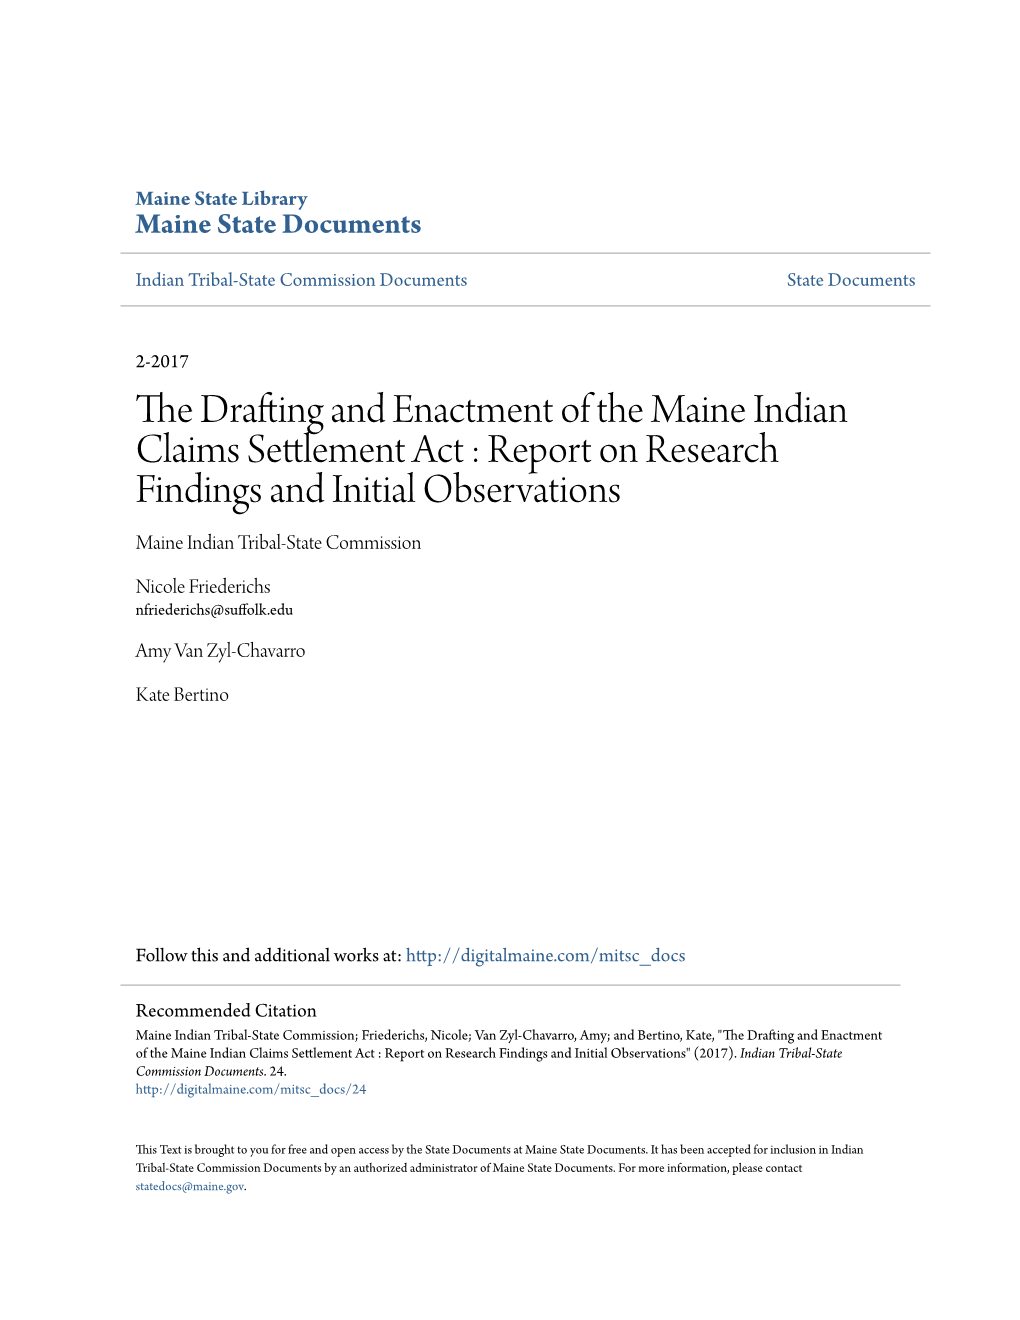 The Drafting and Enactment of the Maine Indian Claims Settlement Act : Report on Research Findings and Initial Observations Maine Indian Tribal-State Commission